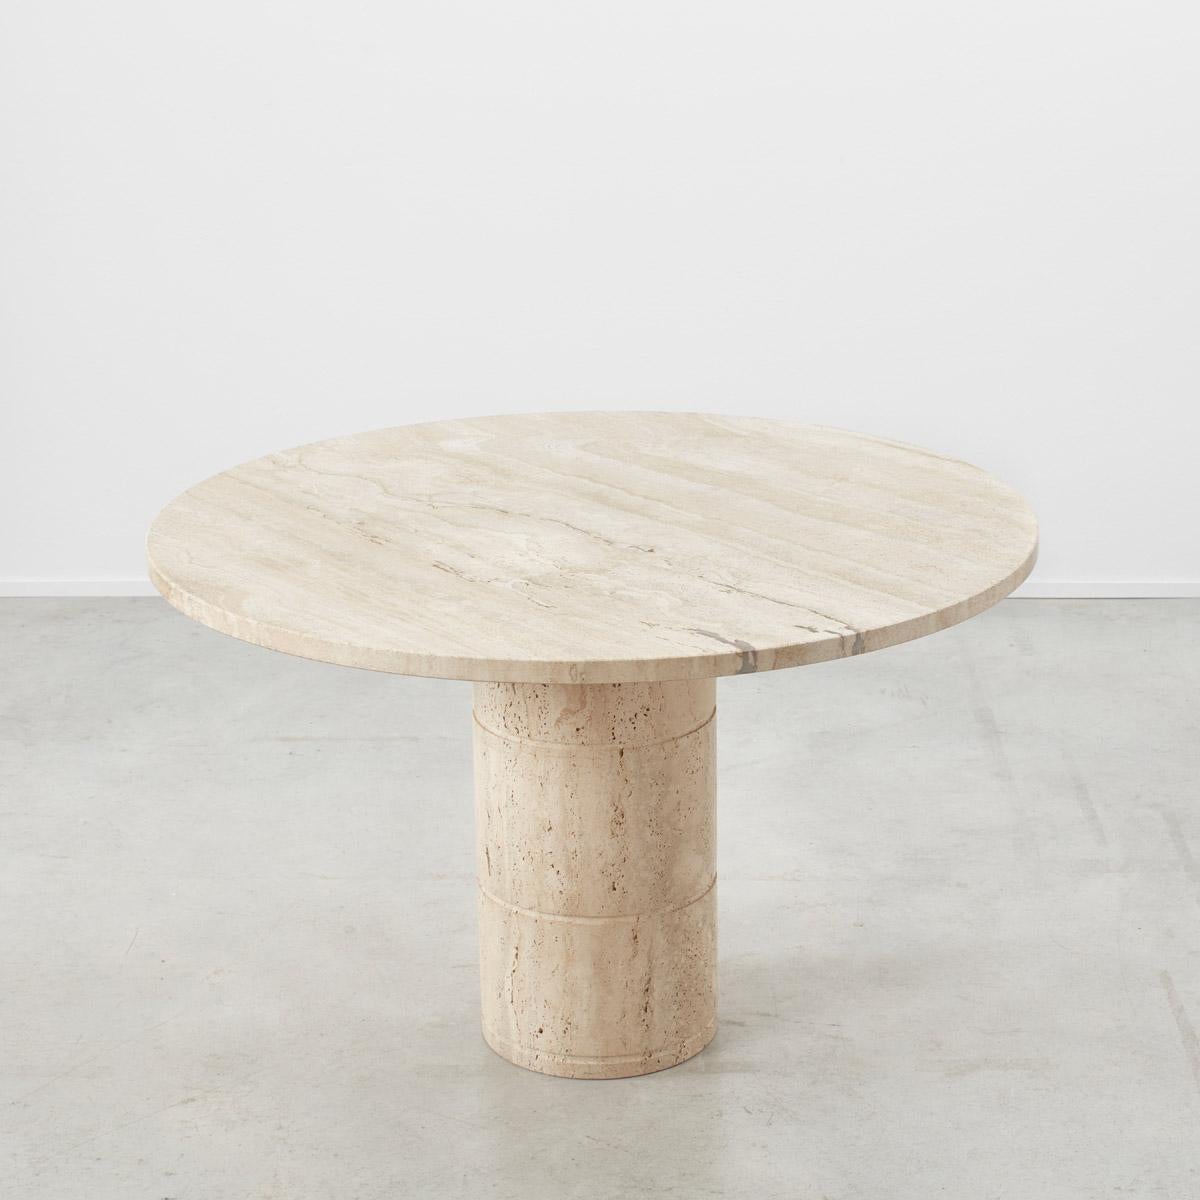 Modern Up&Up Travertine Dining Table Up&Up, Italy, circa 1970